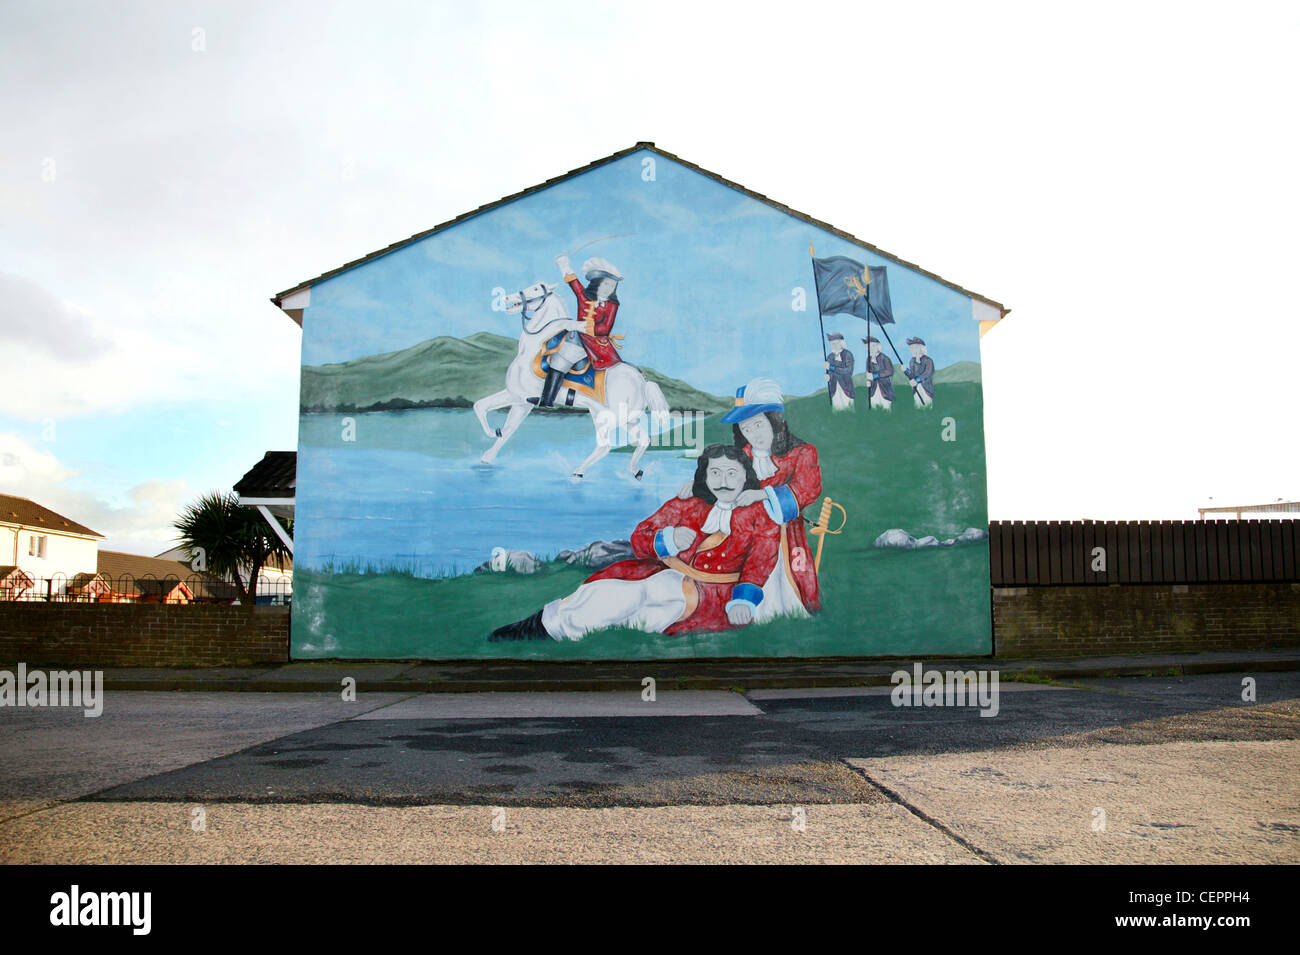 An historical political mural on the side of a building in Shankill Parade. Stock Photo